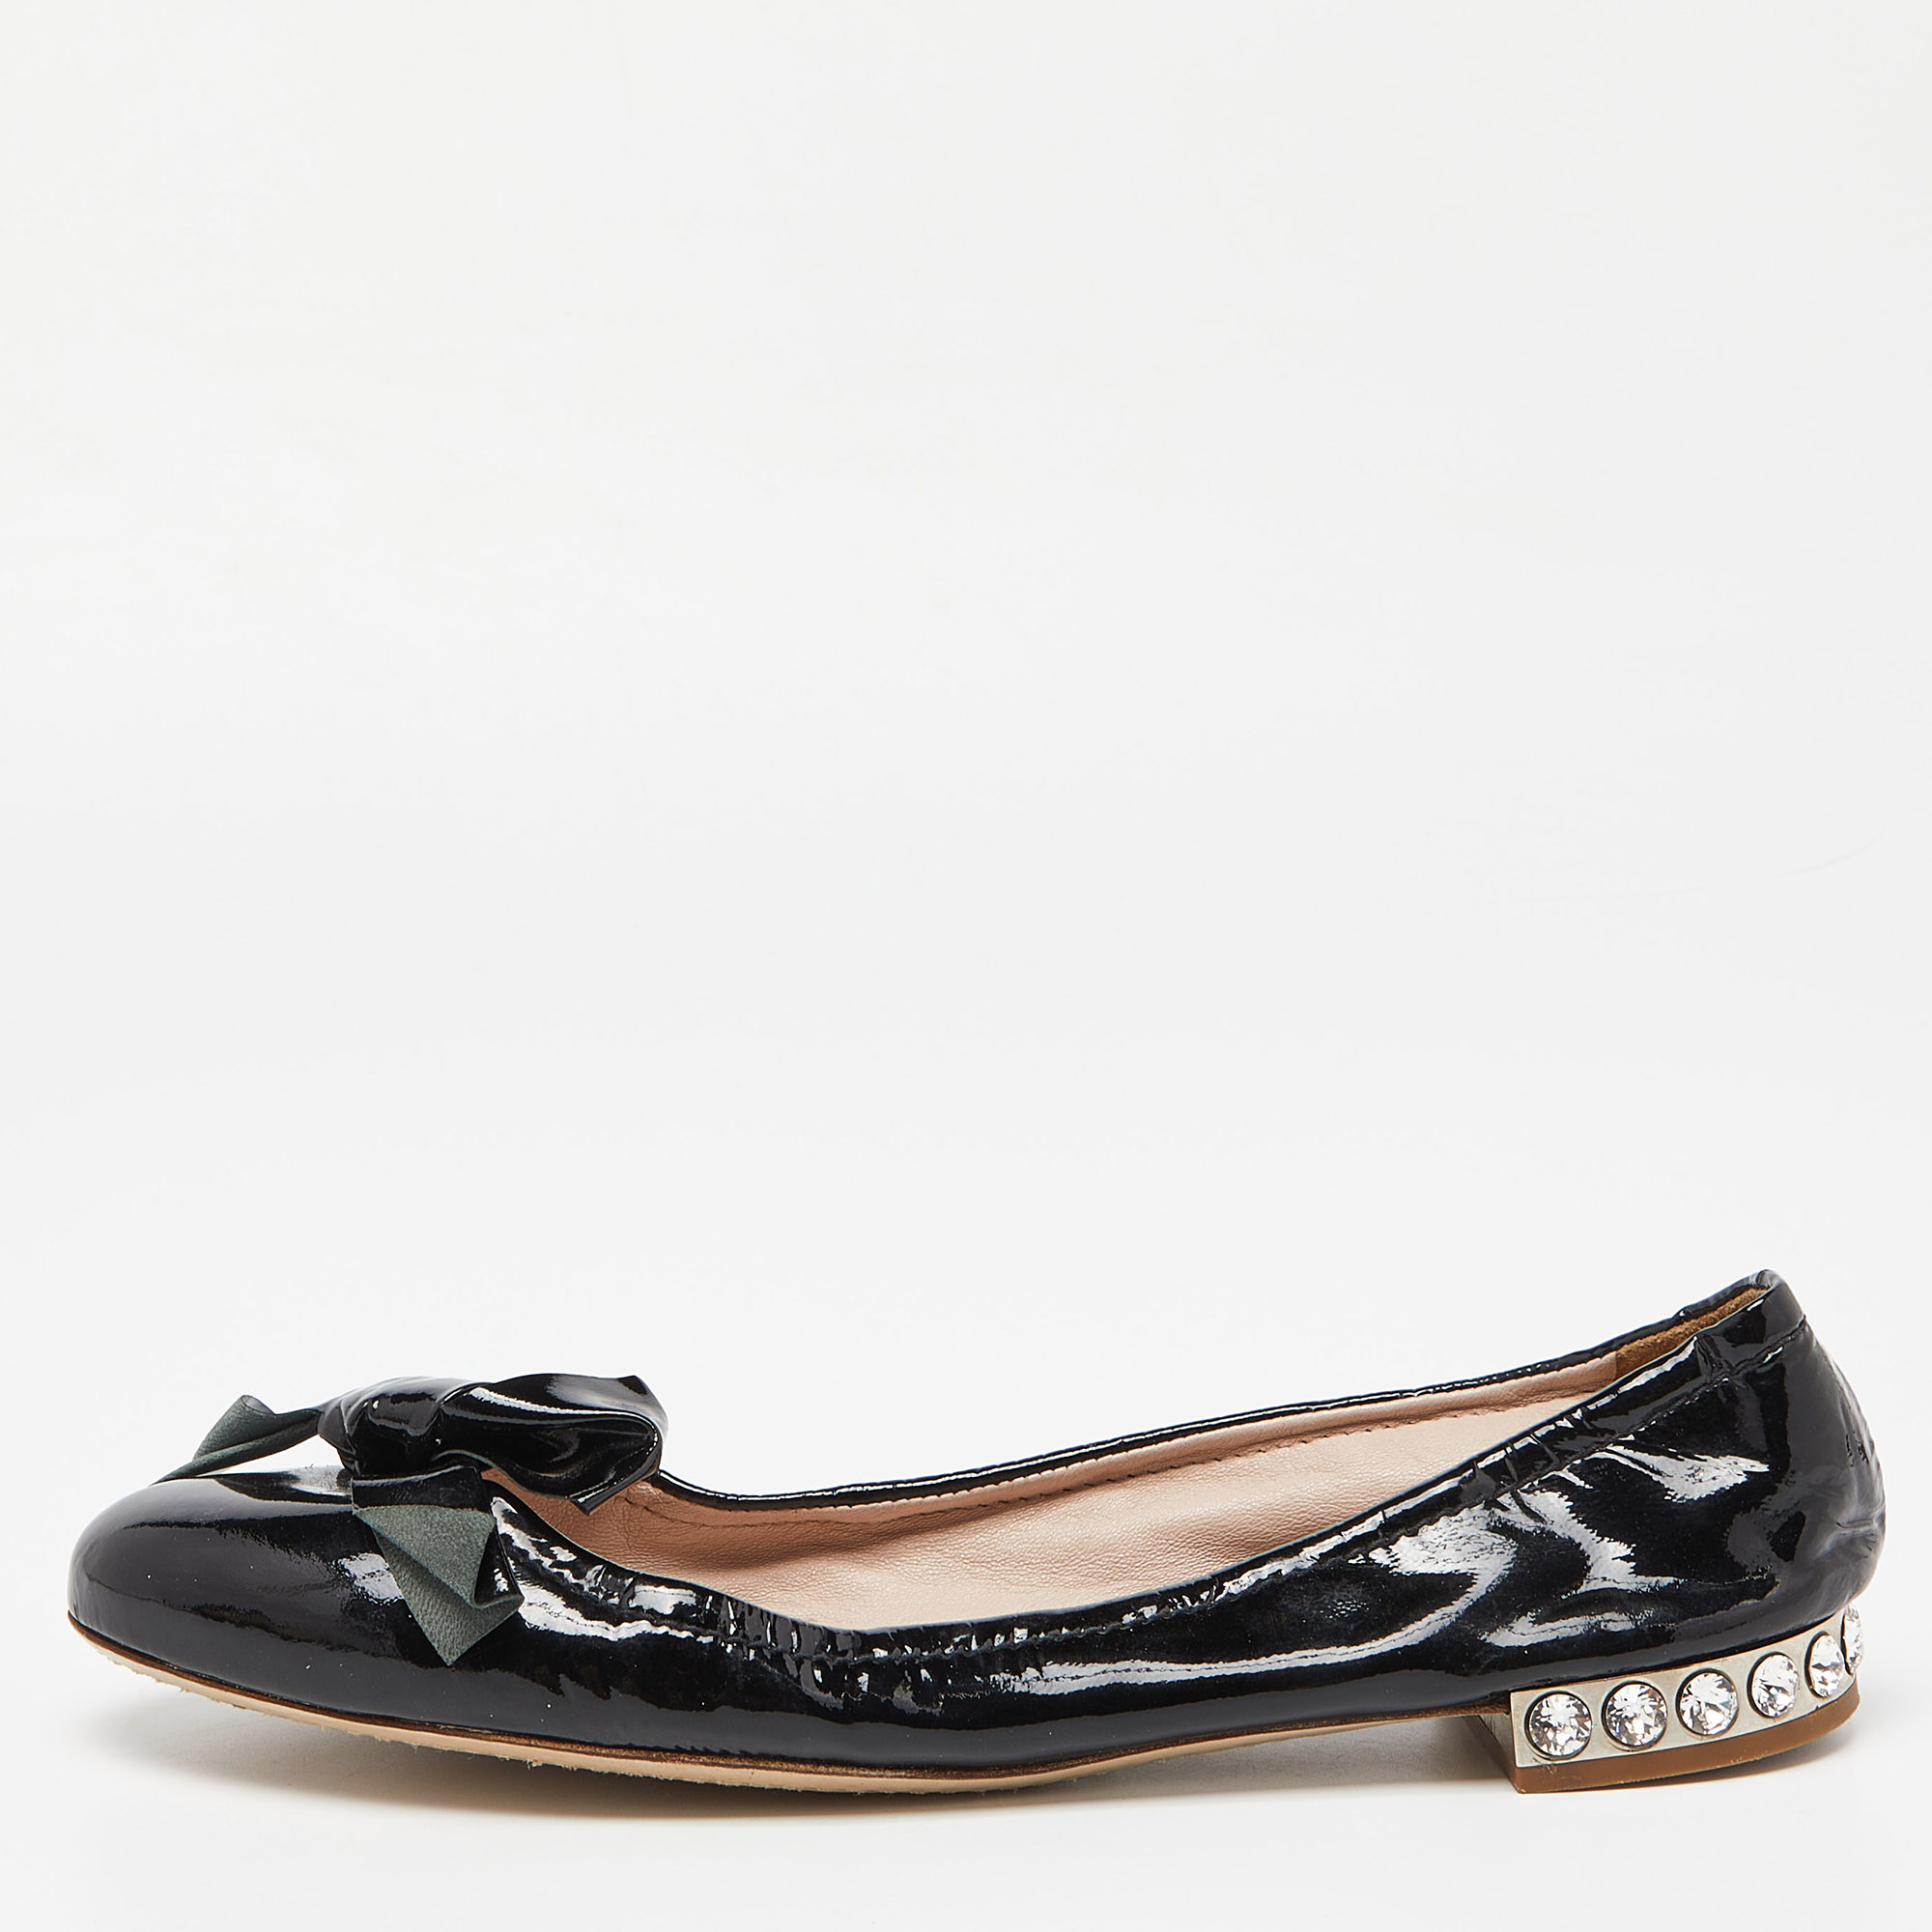 Pre-owned Miu Miu Black Patent Leather Crystal Embellished Bow Ballet Flats Size 37.5